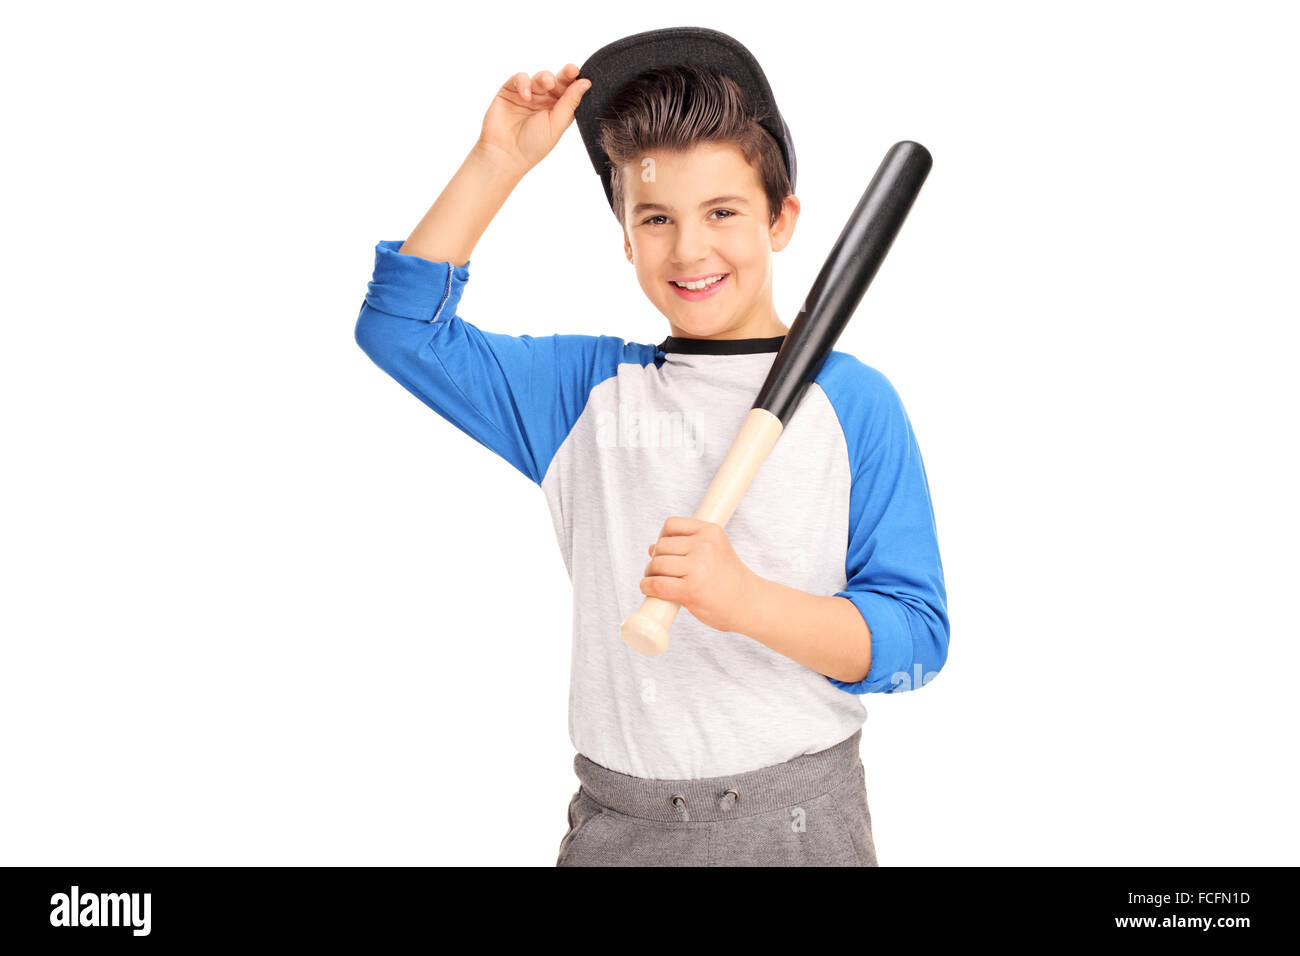 Little boy holding a baseball bat and looking at the camera isolated on white background Stock Photo